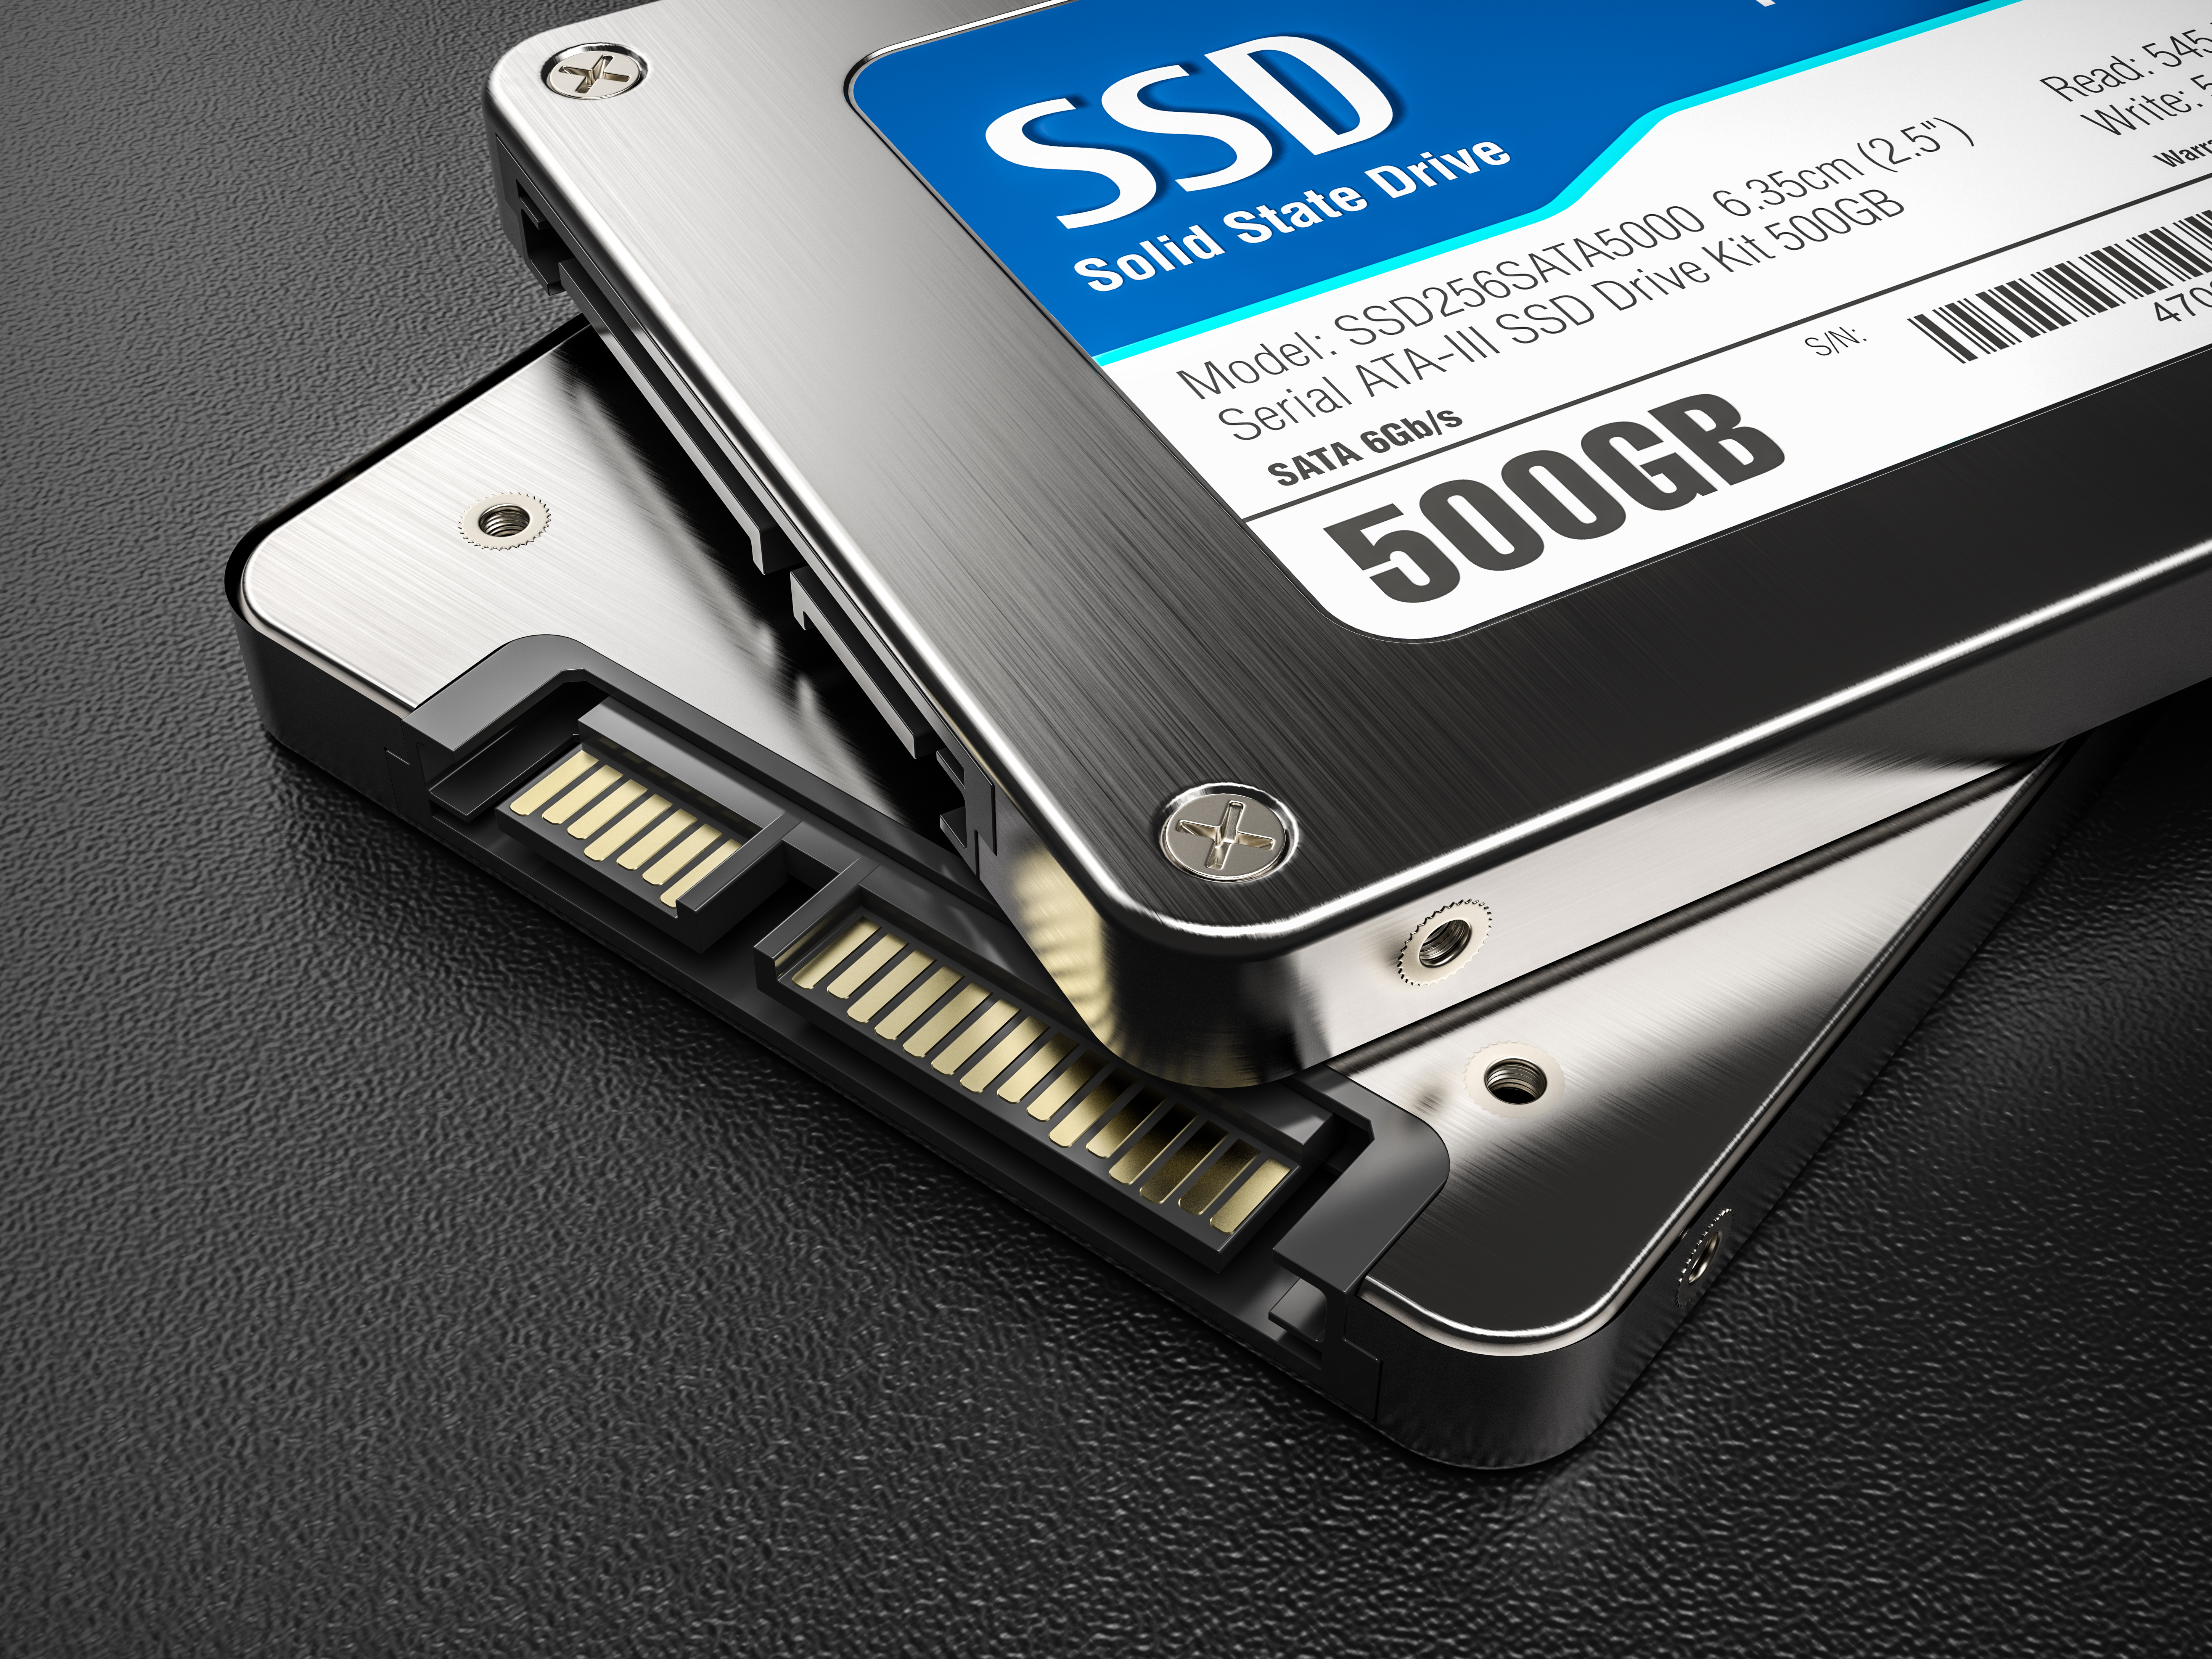 promotion bleeding law Does SSD size affect speed in gaming? - Newegg Insider